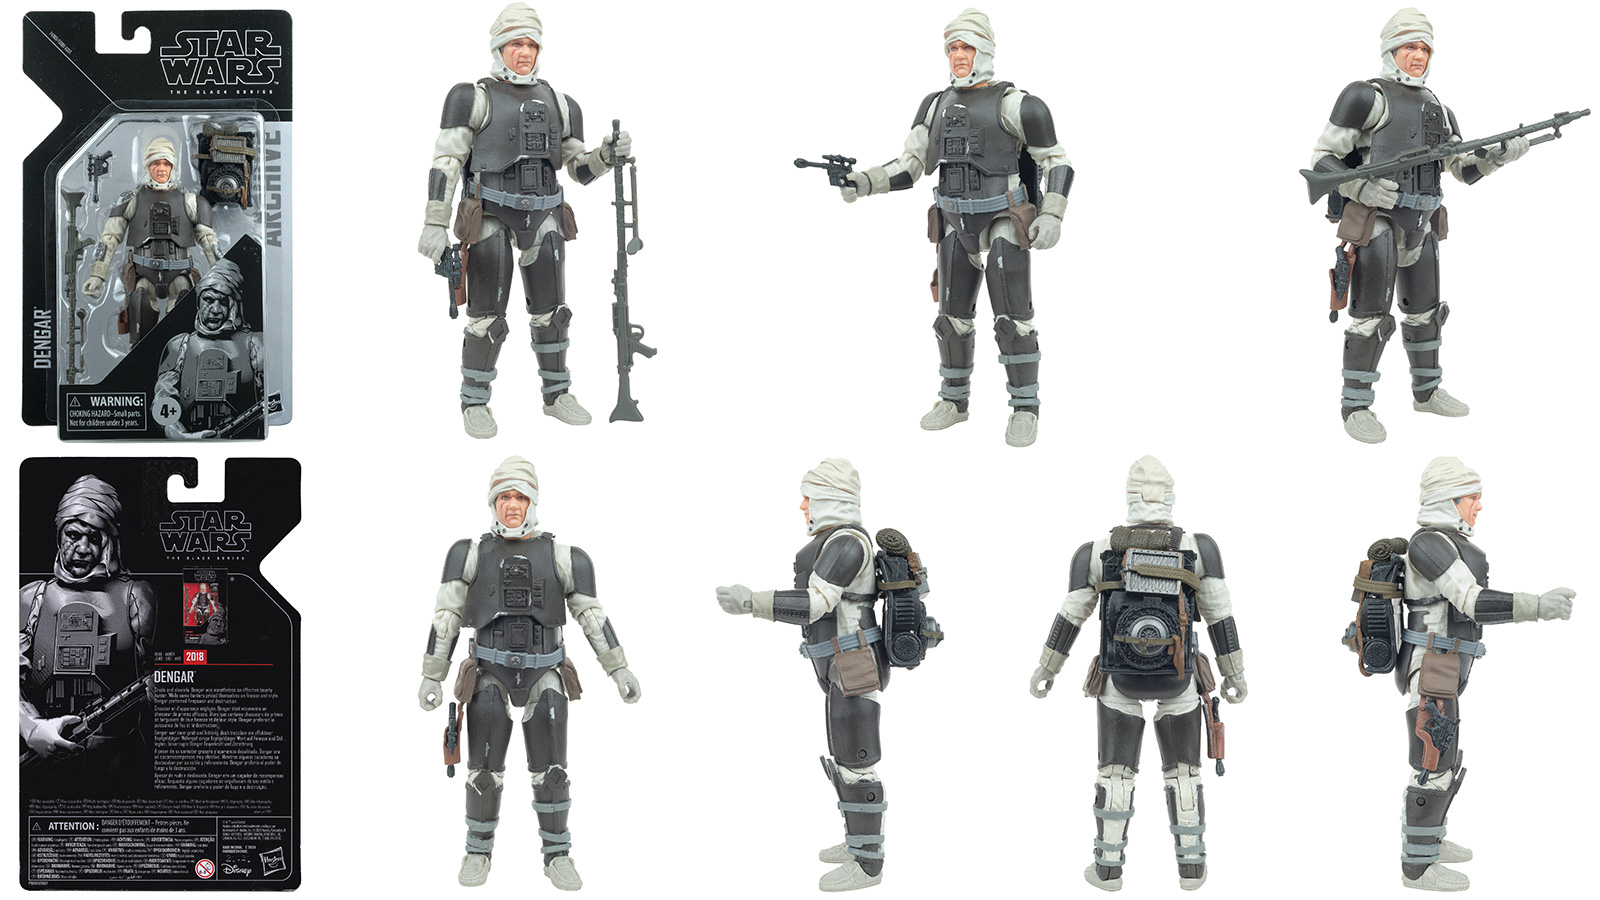 New Photos - The Black Series Archive 6-Inch Dengar